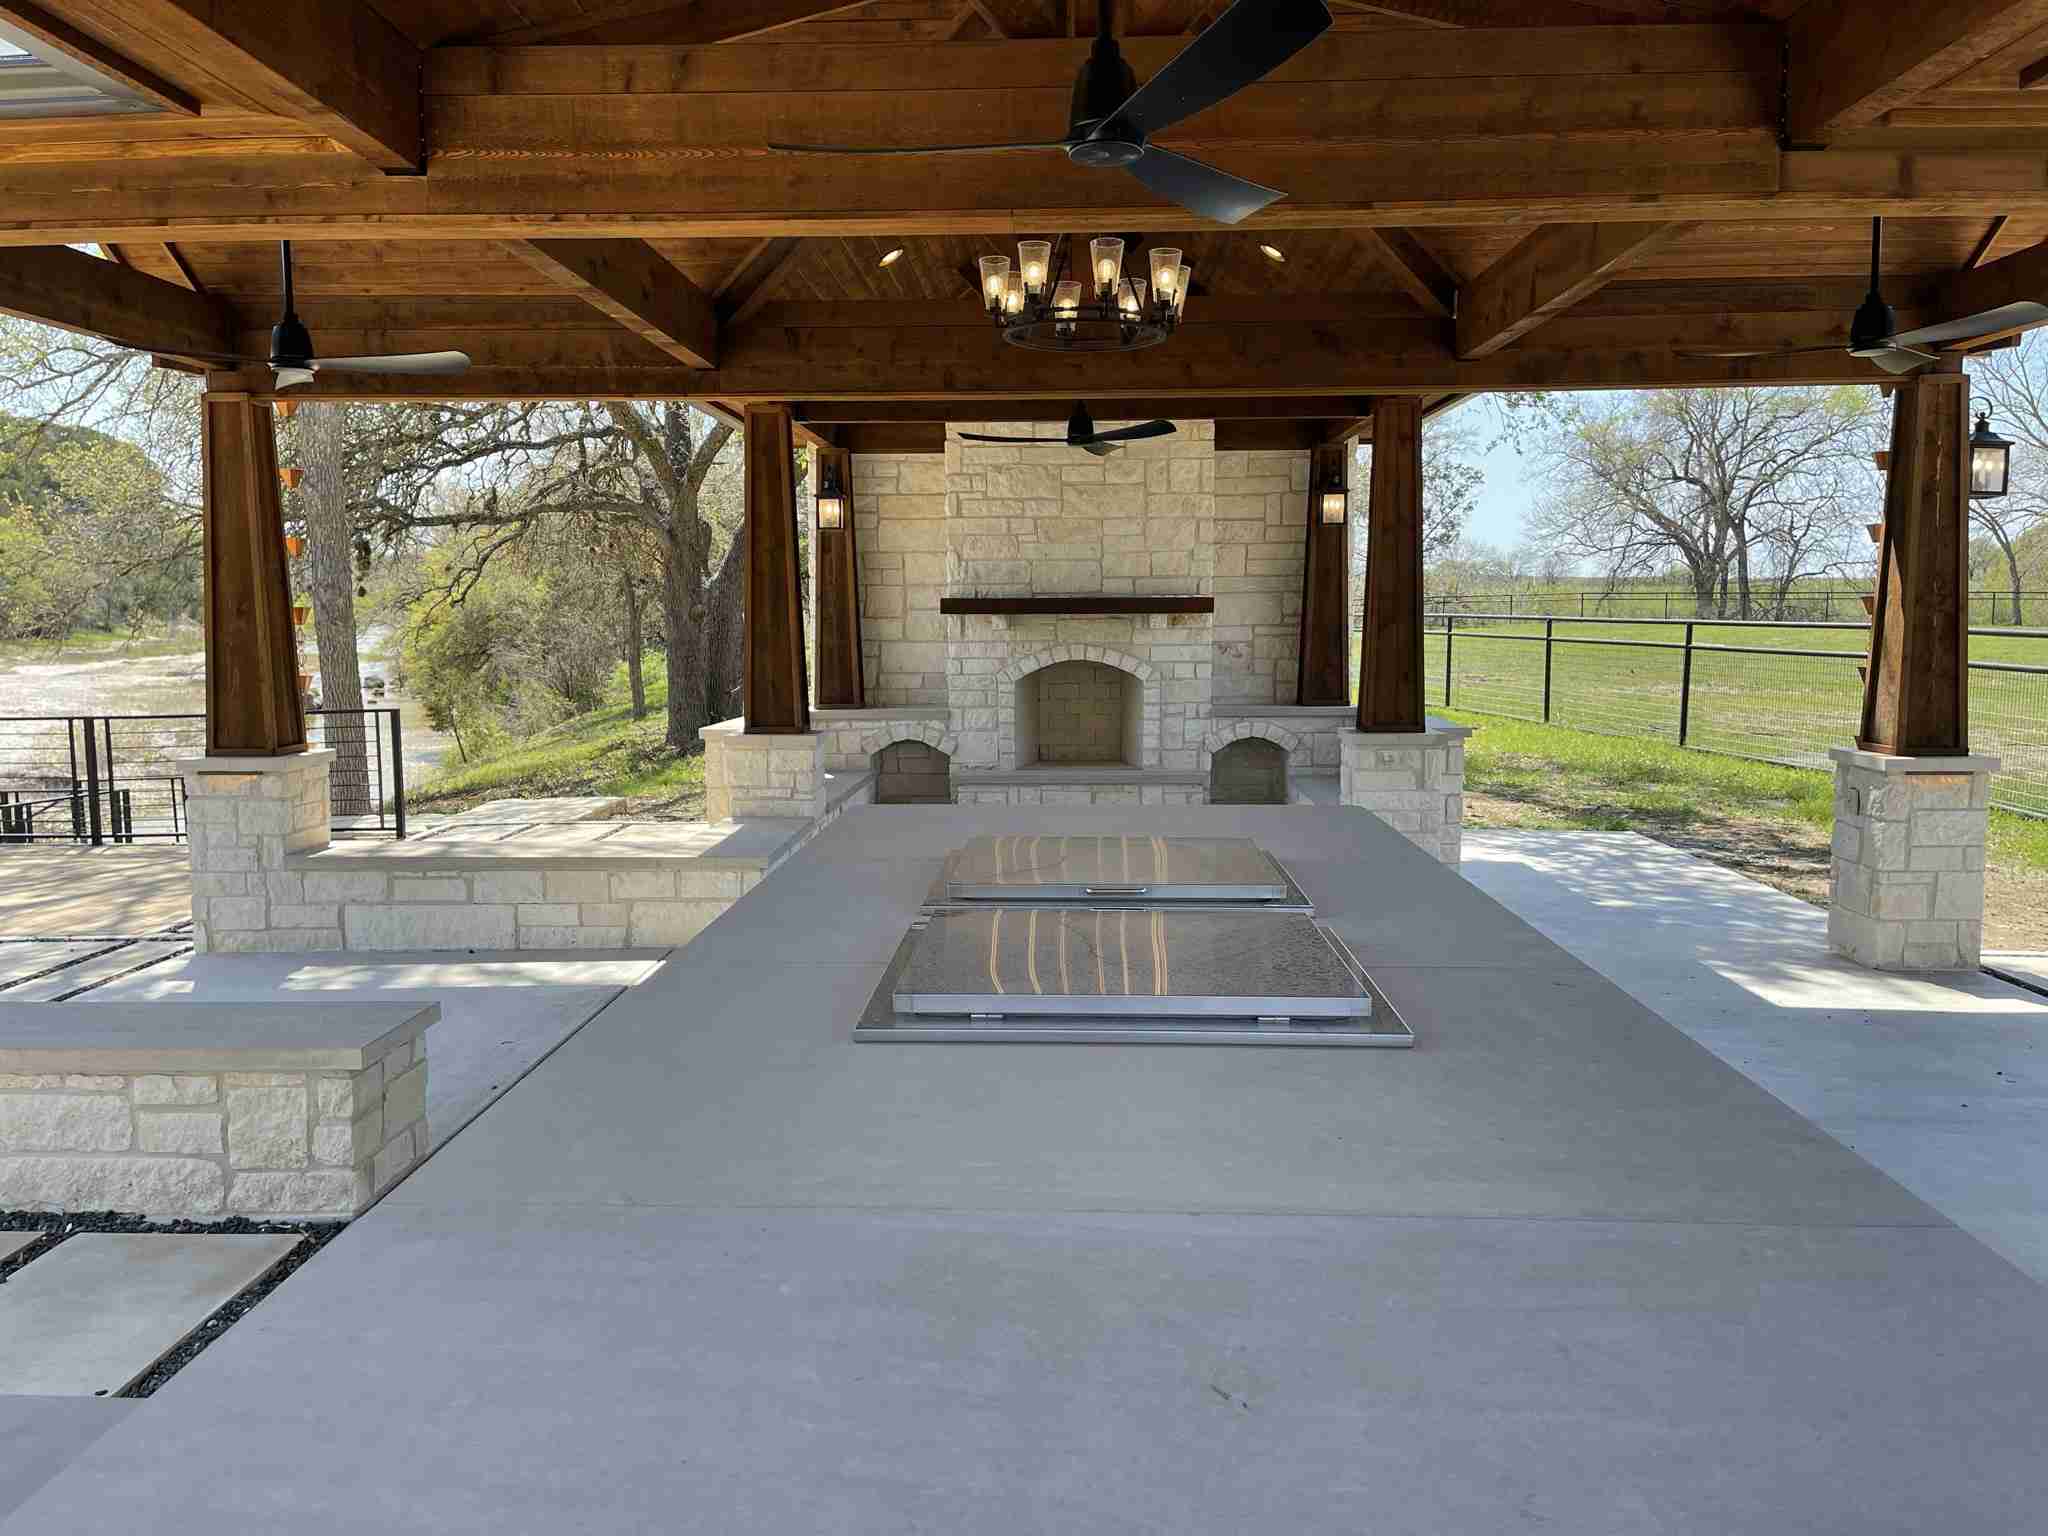 Covered Patio, Fireplace & Riverfront Deck for Entertaining